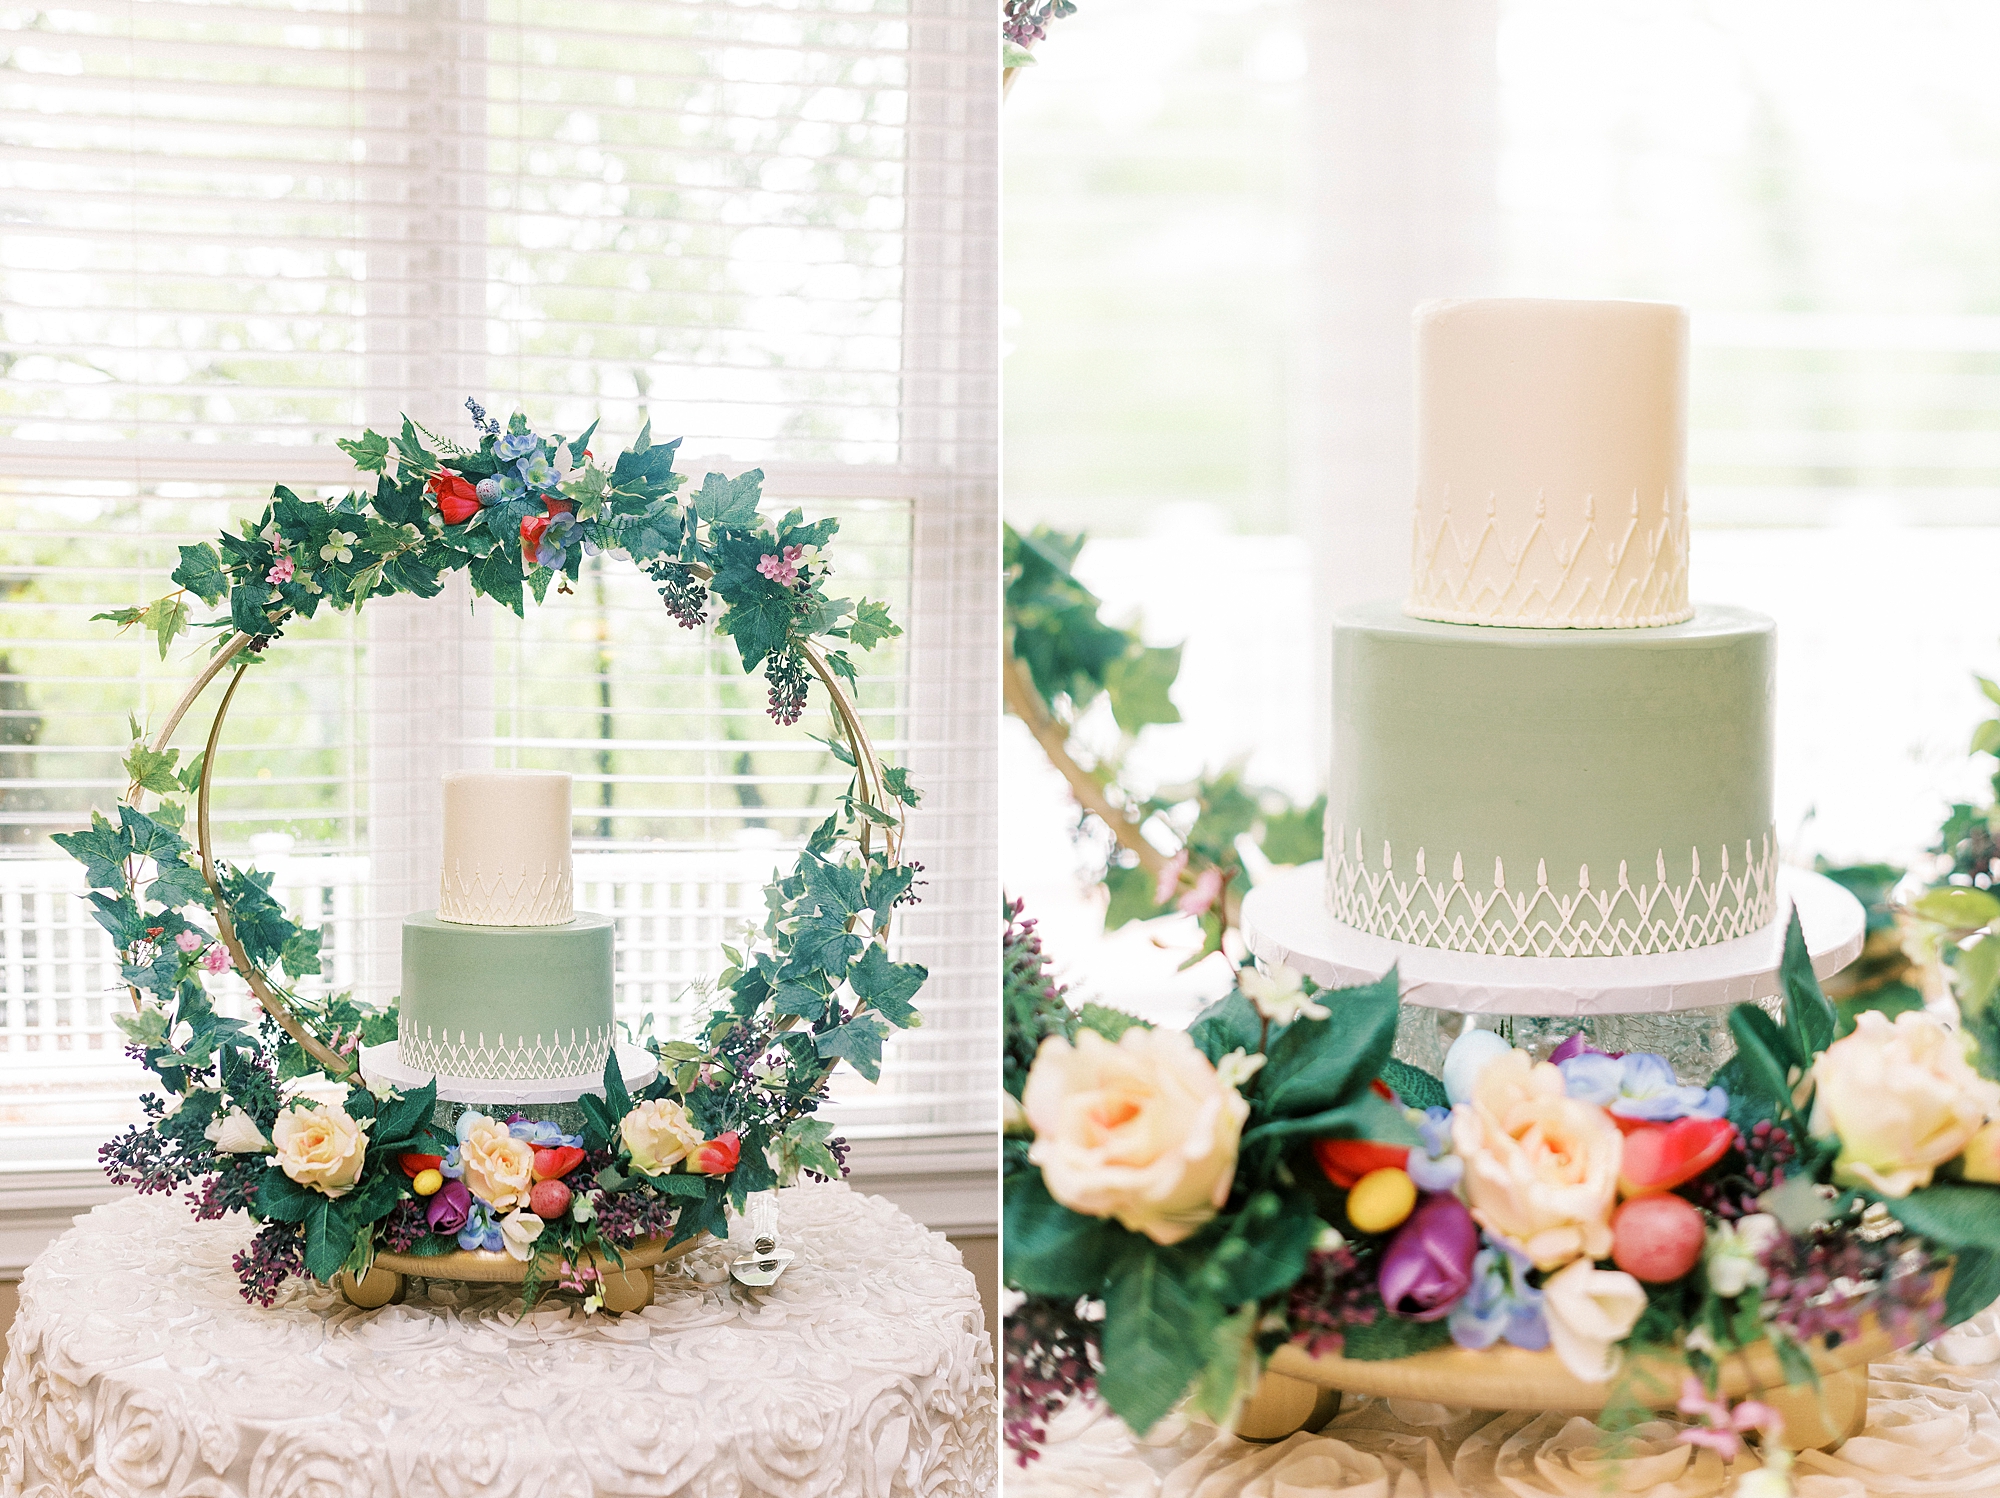 tiered wedding cake with green and white accents under floral arbor 